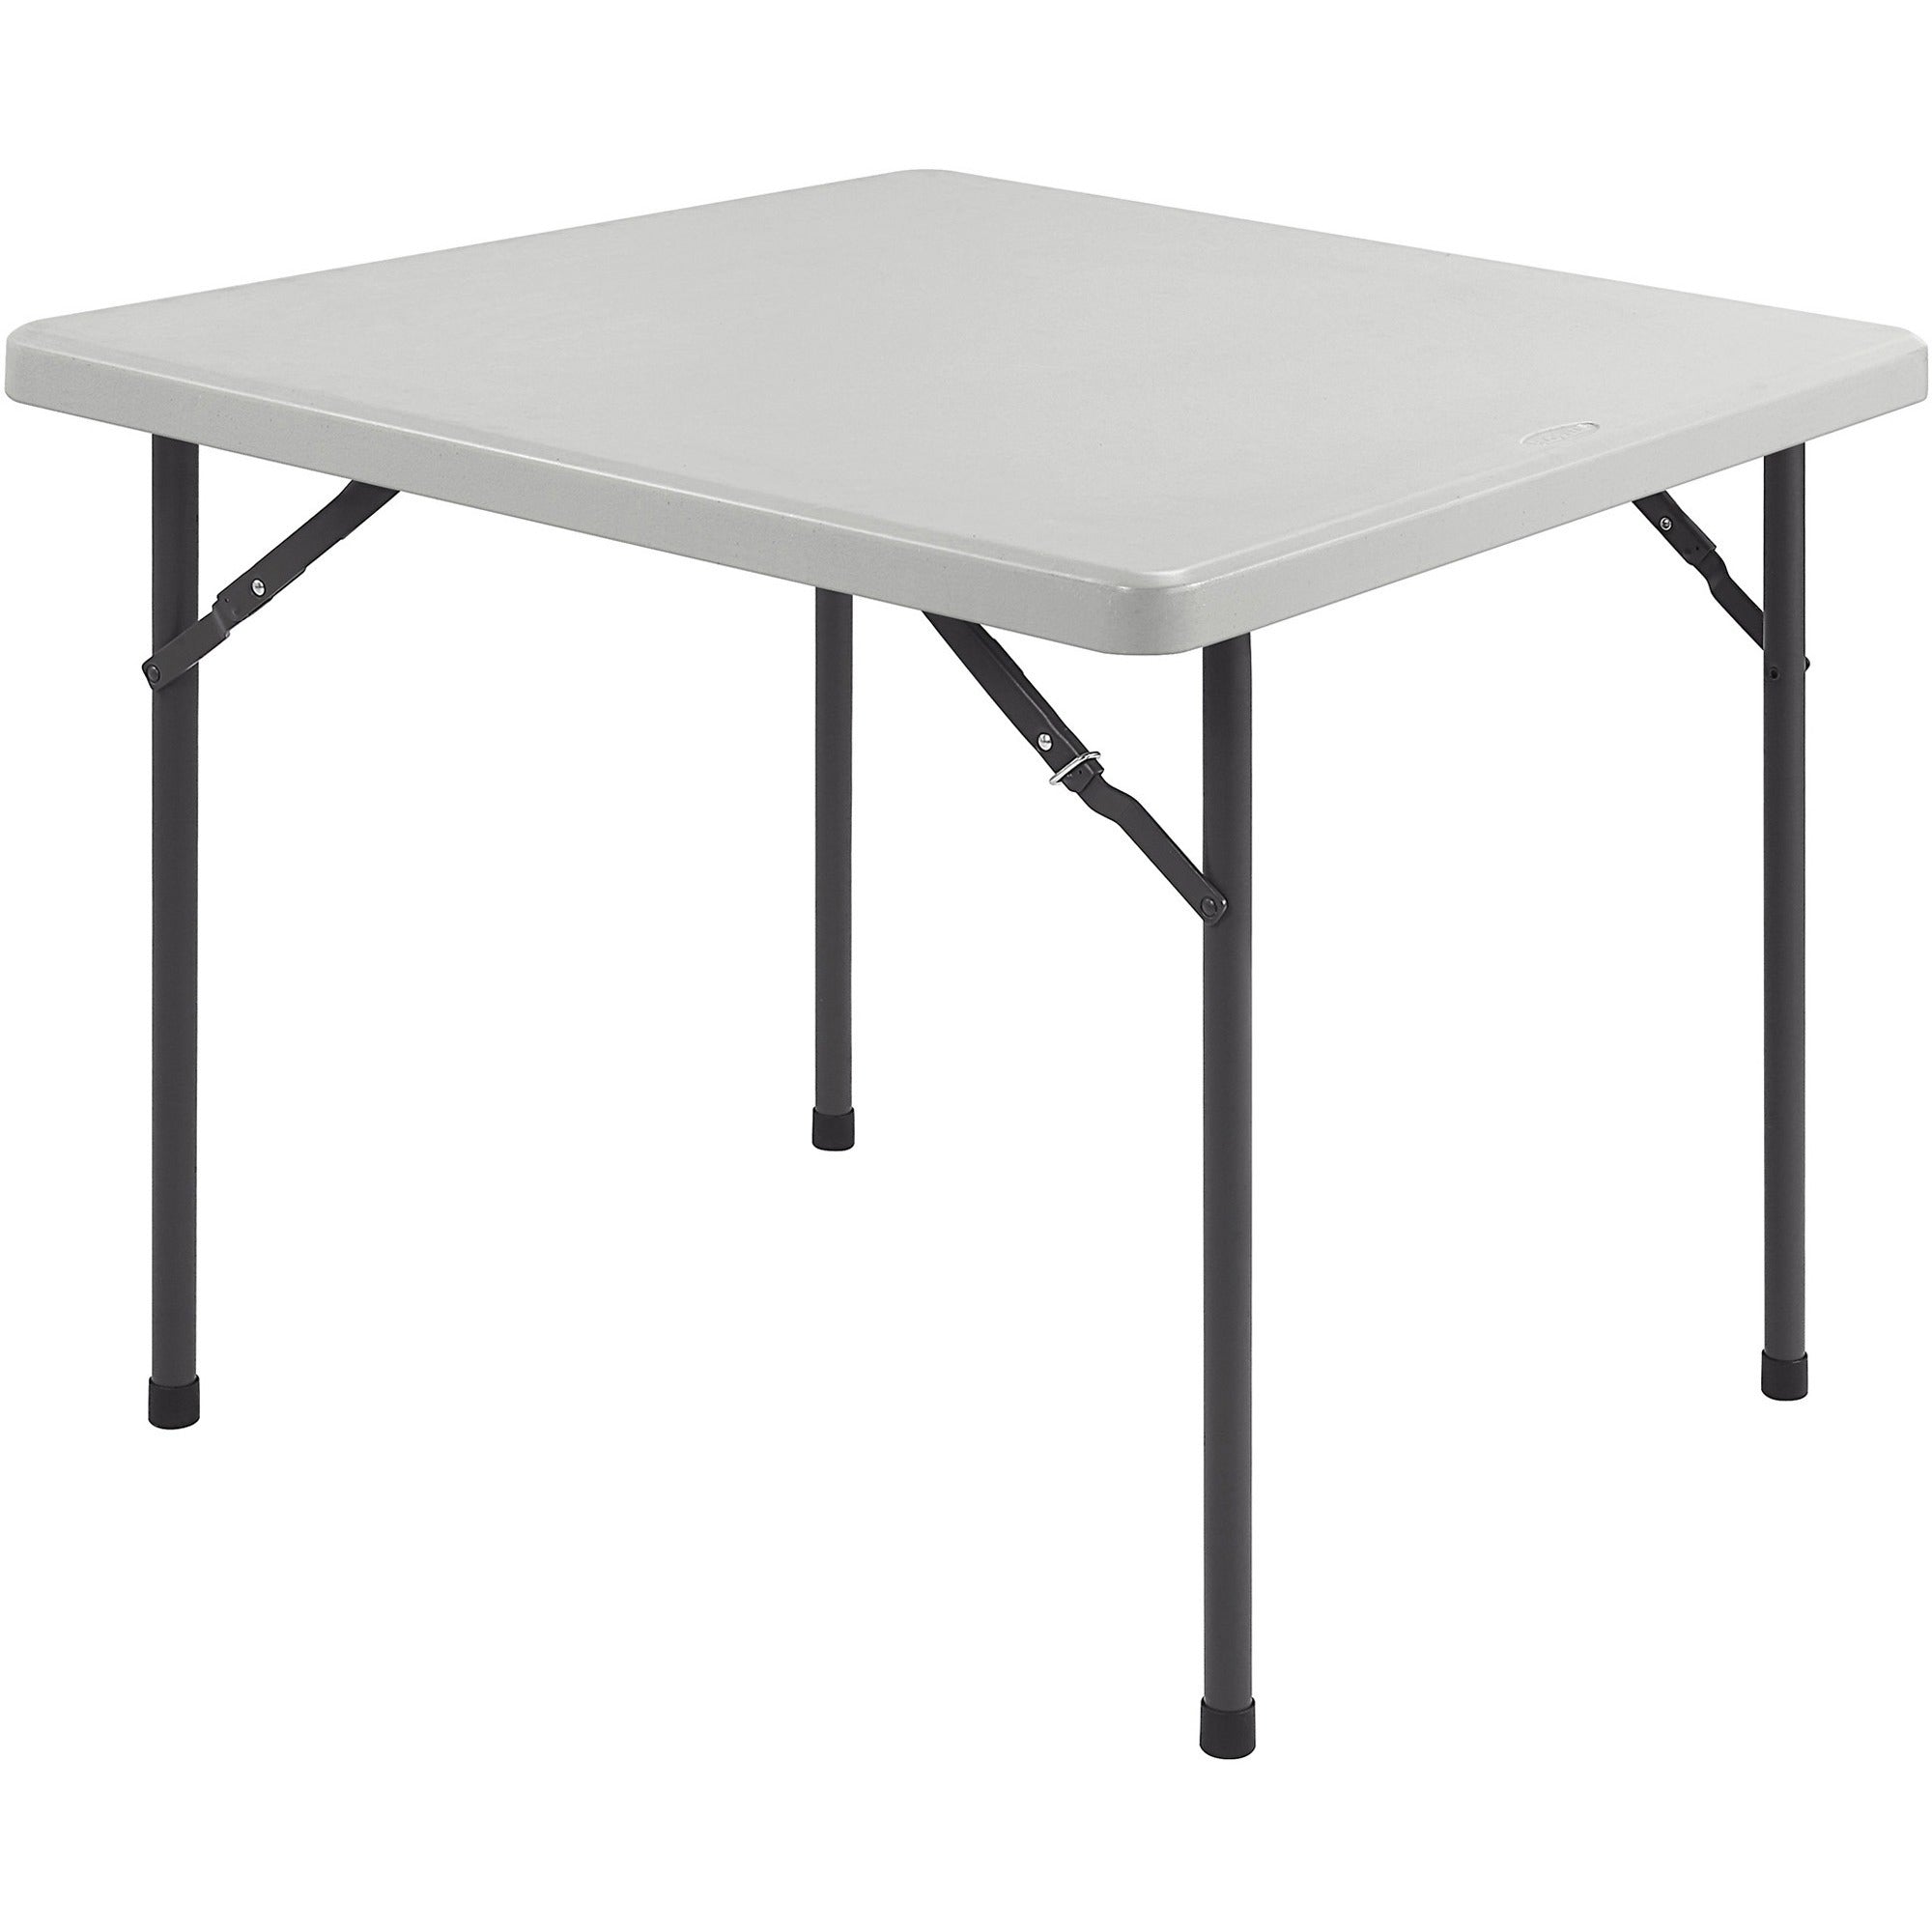 Lorell Ultra-Lite Banquet Folding Table - For - Table TopSquare Top - 600 lb Capacity - 29" Height x 36" Width x 36" Depth - Gray, Powder Coated - 1 Each - 